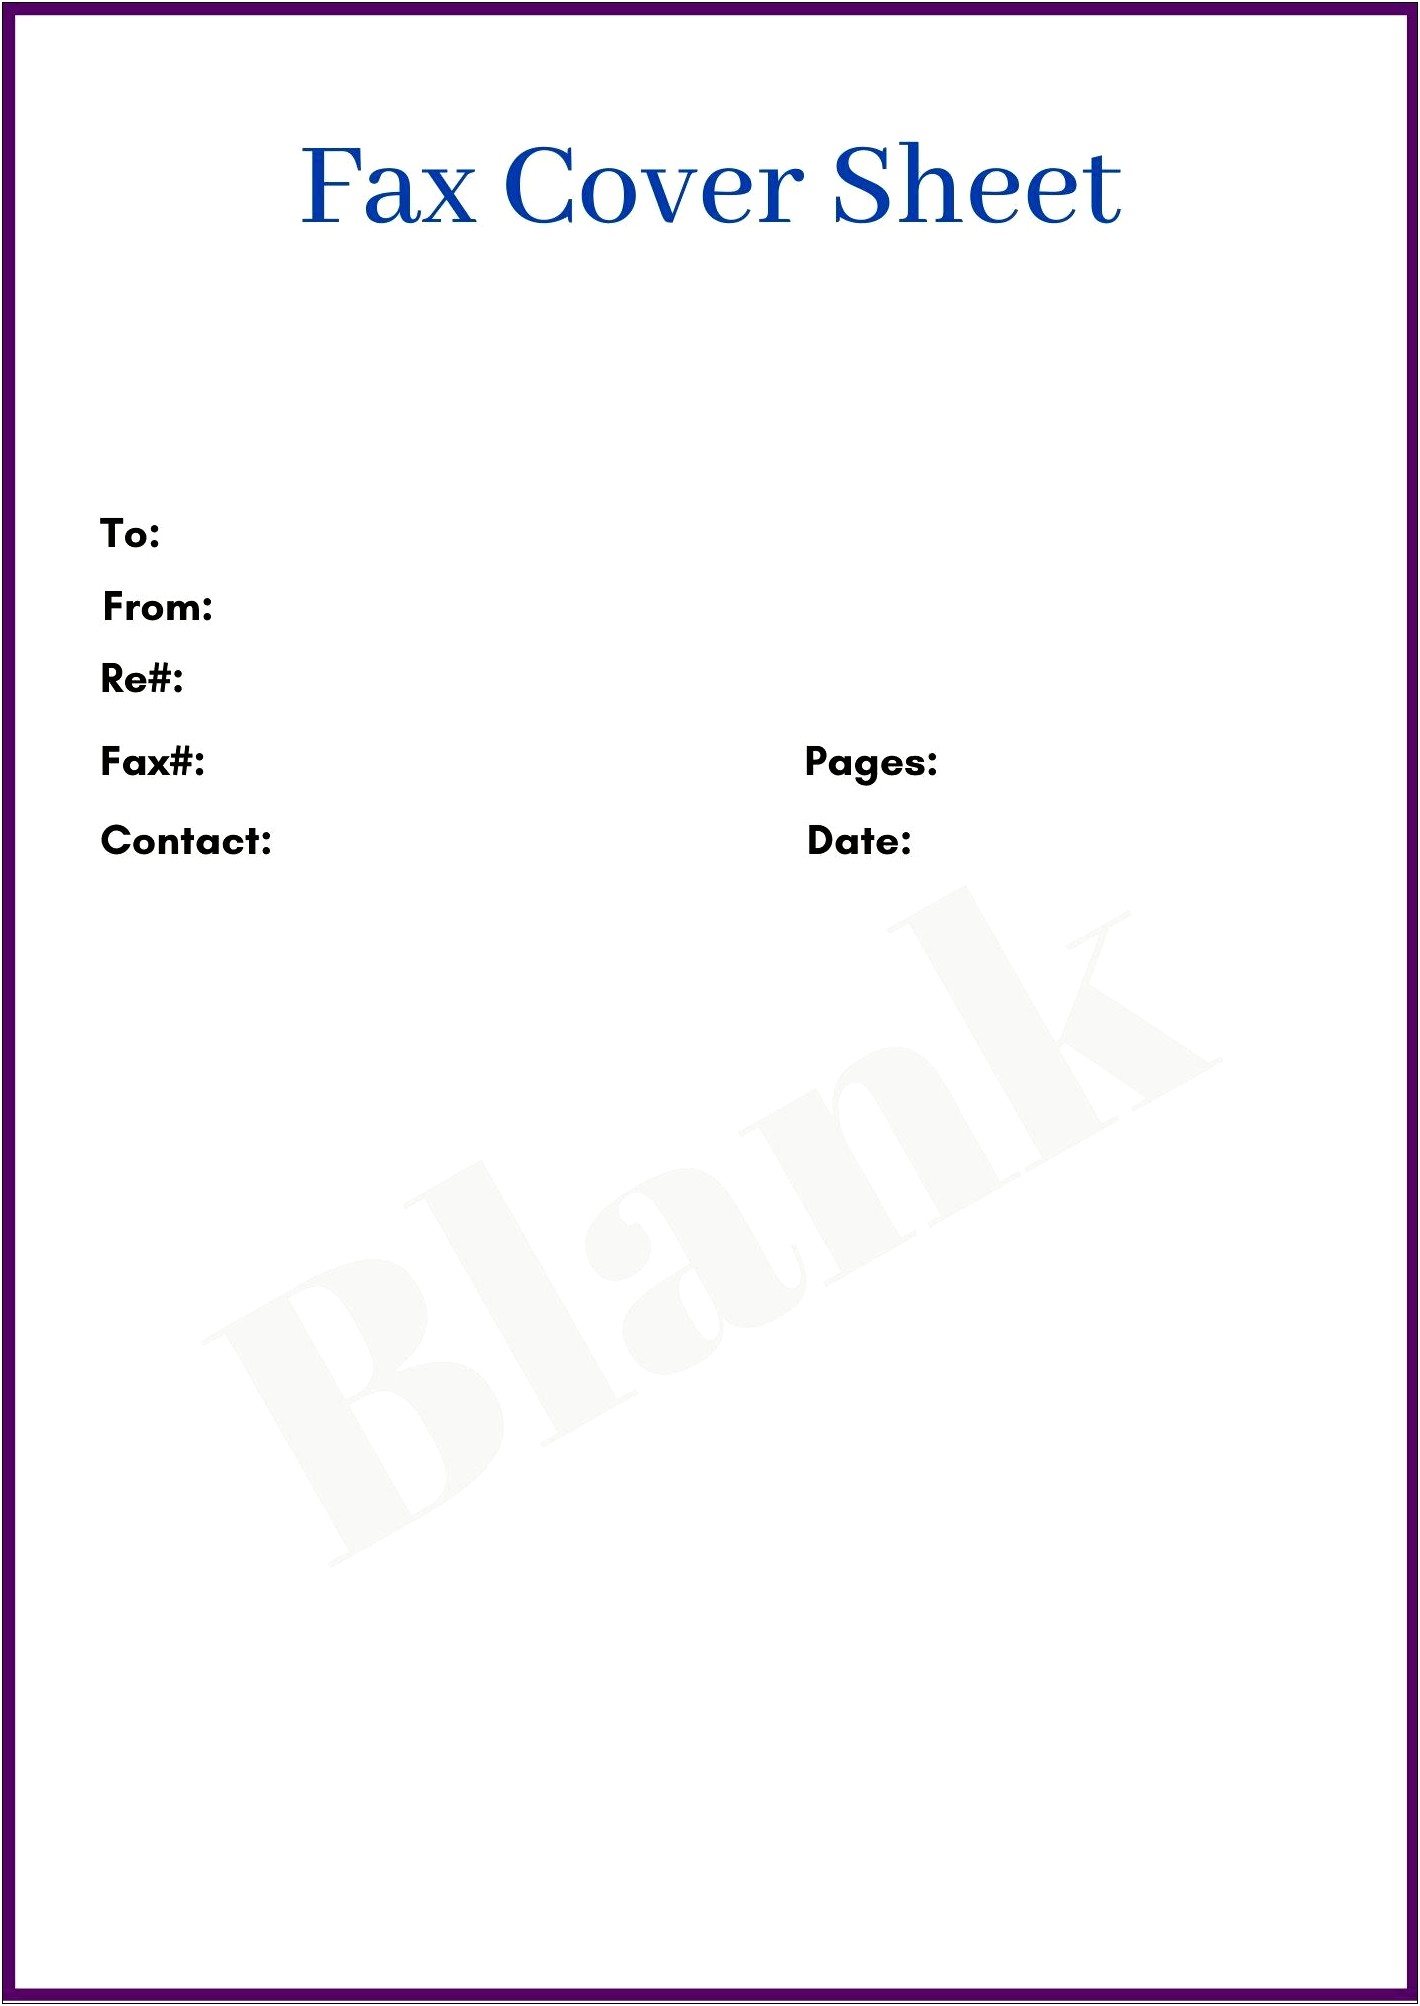 Ms Word 2010 Fax Cover Sheet Template